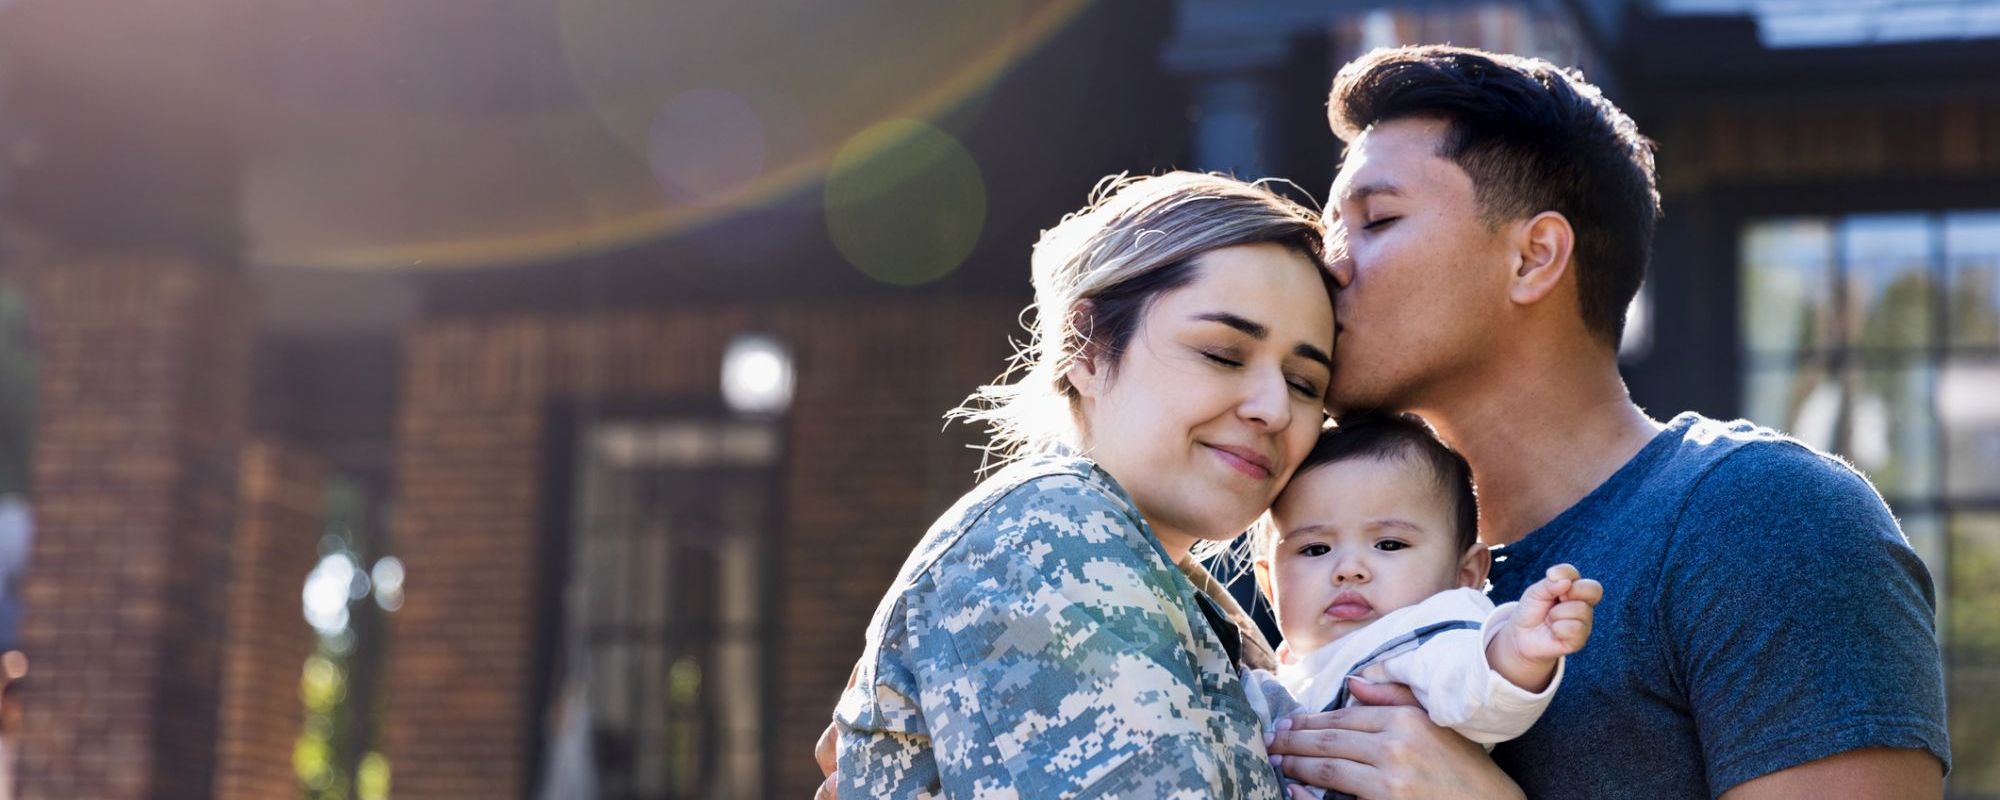 Woman in military uniform and father hugging baby.